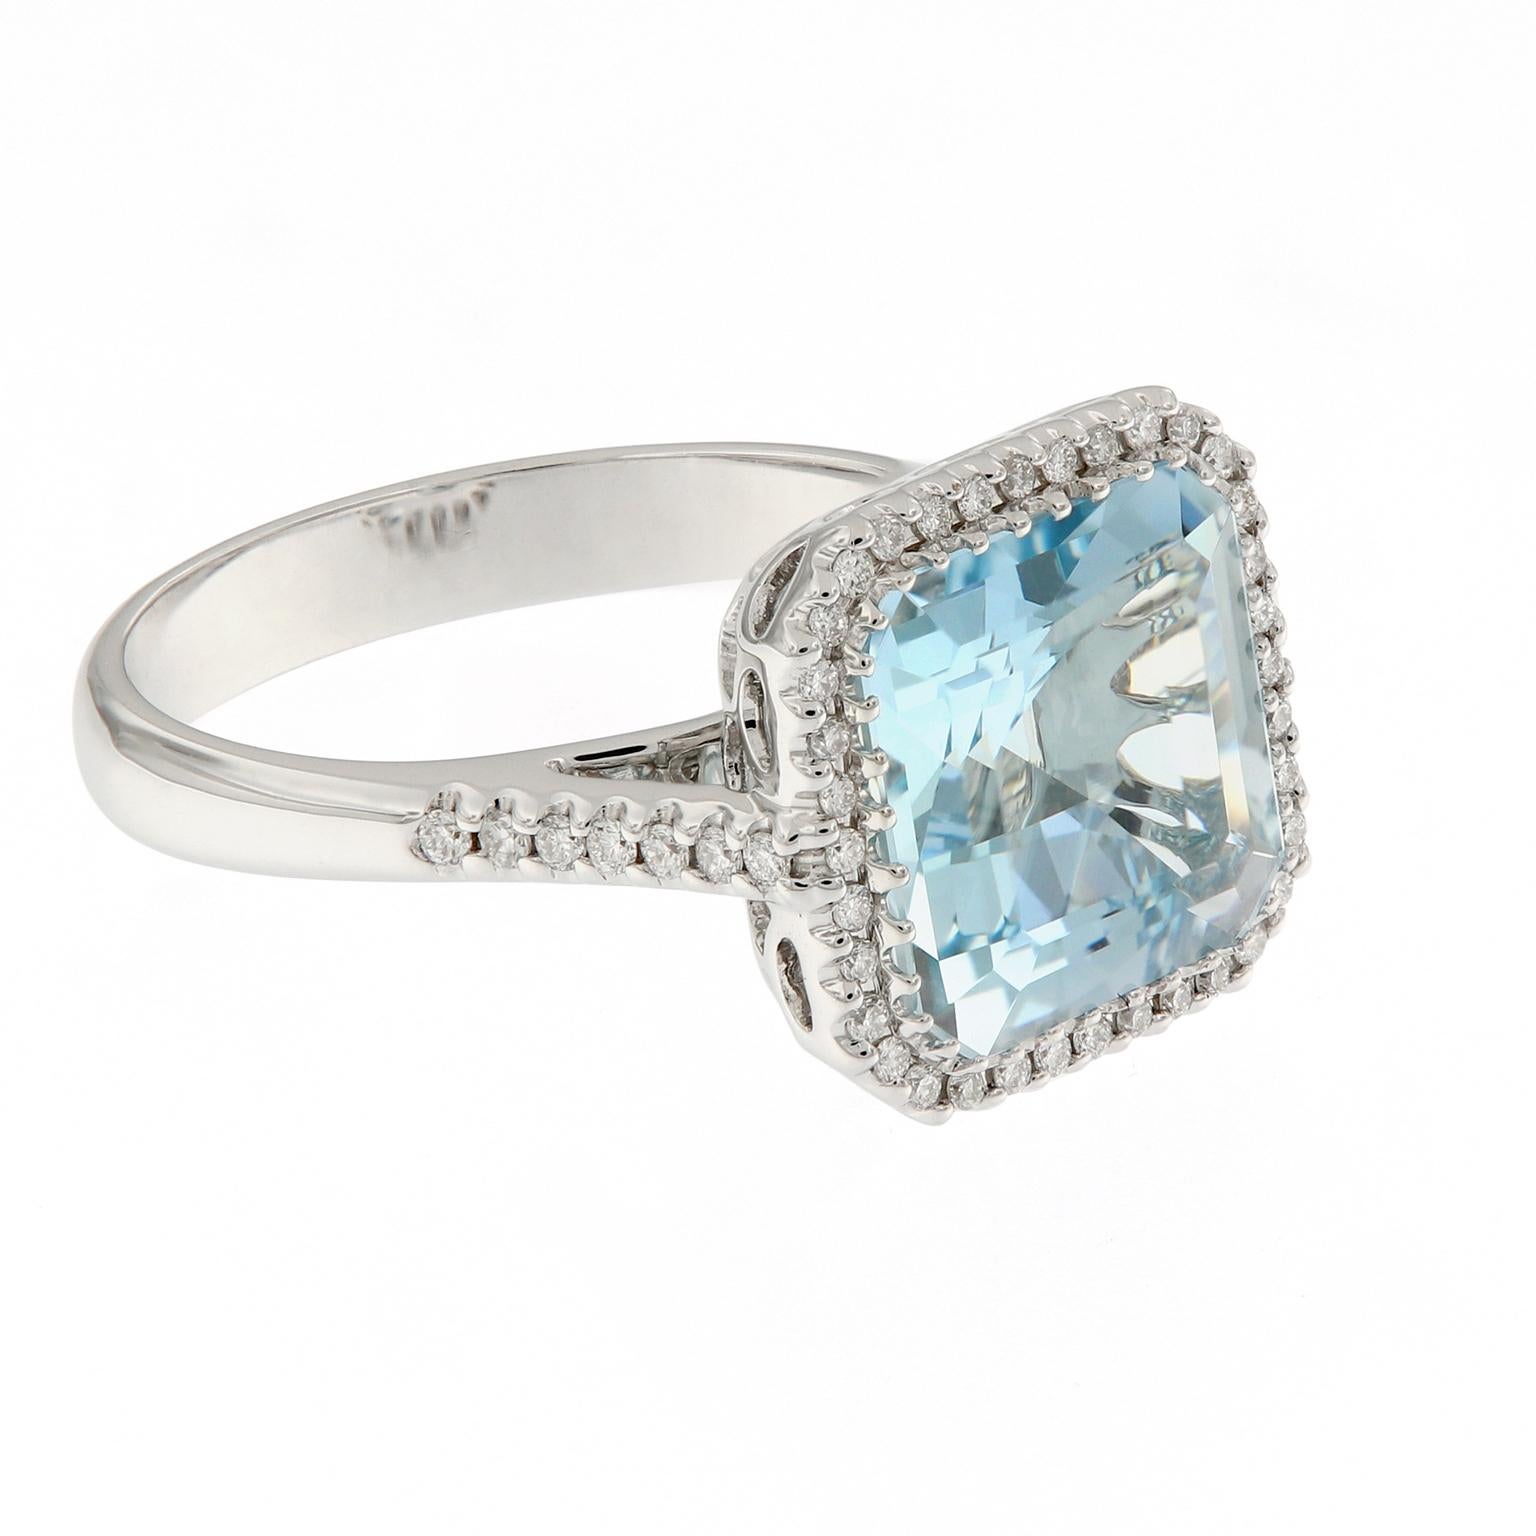 This gorgeous 18k white gold cocktail ring features a square step-cut aquamarine surrounded by a halo of pavé-set diamonds and beautifully balanced with diamonds running down the shank. Ring size 6.5. Weighs 5.2 grams.

Aquamarine 3.63 ct
Diamonds